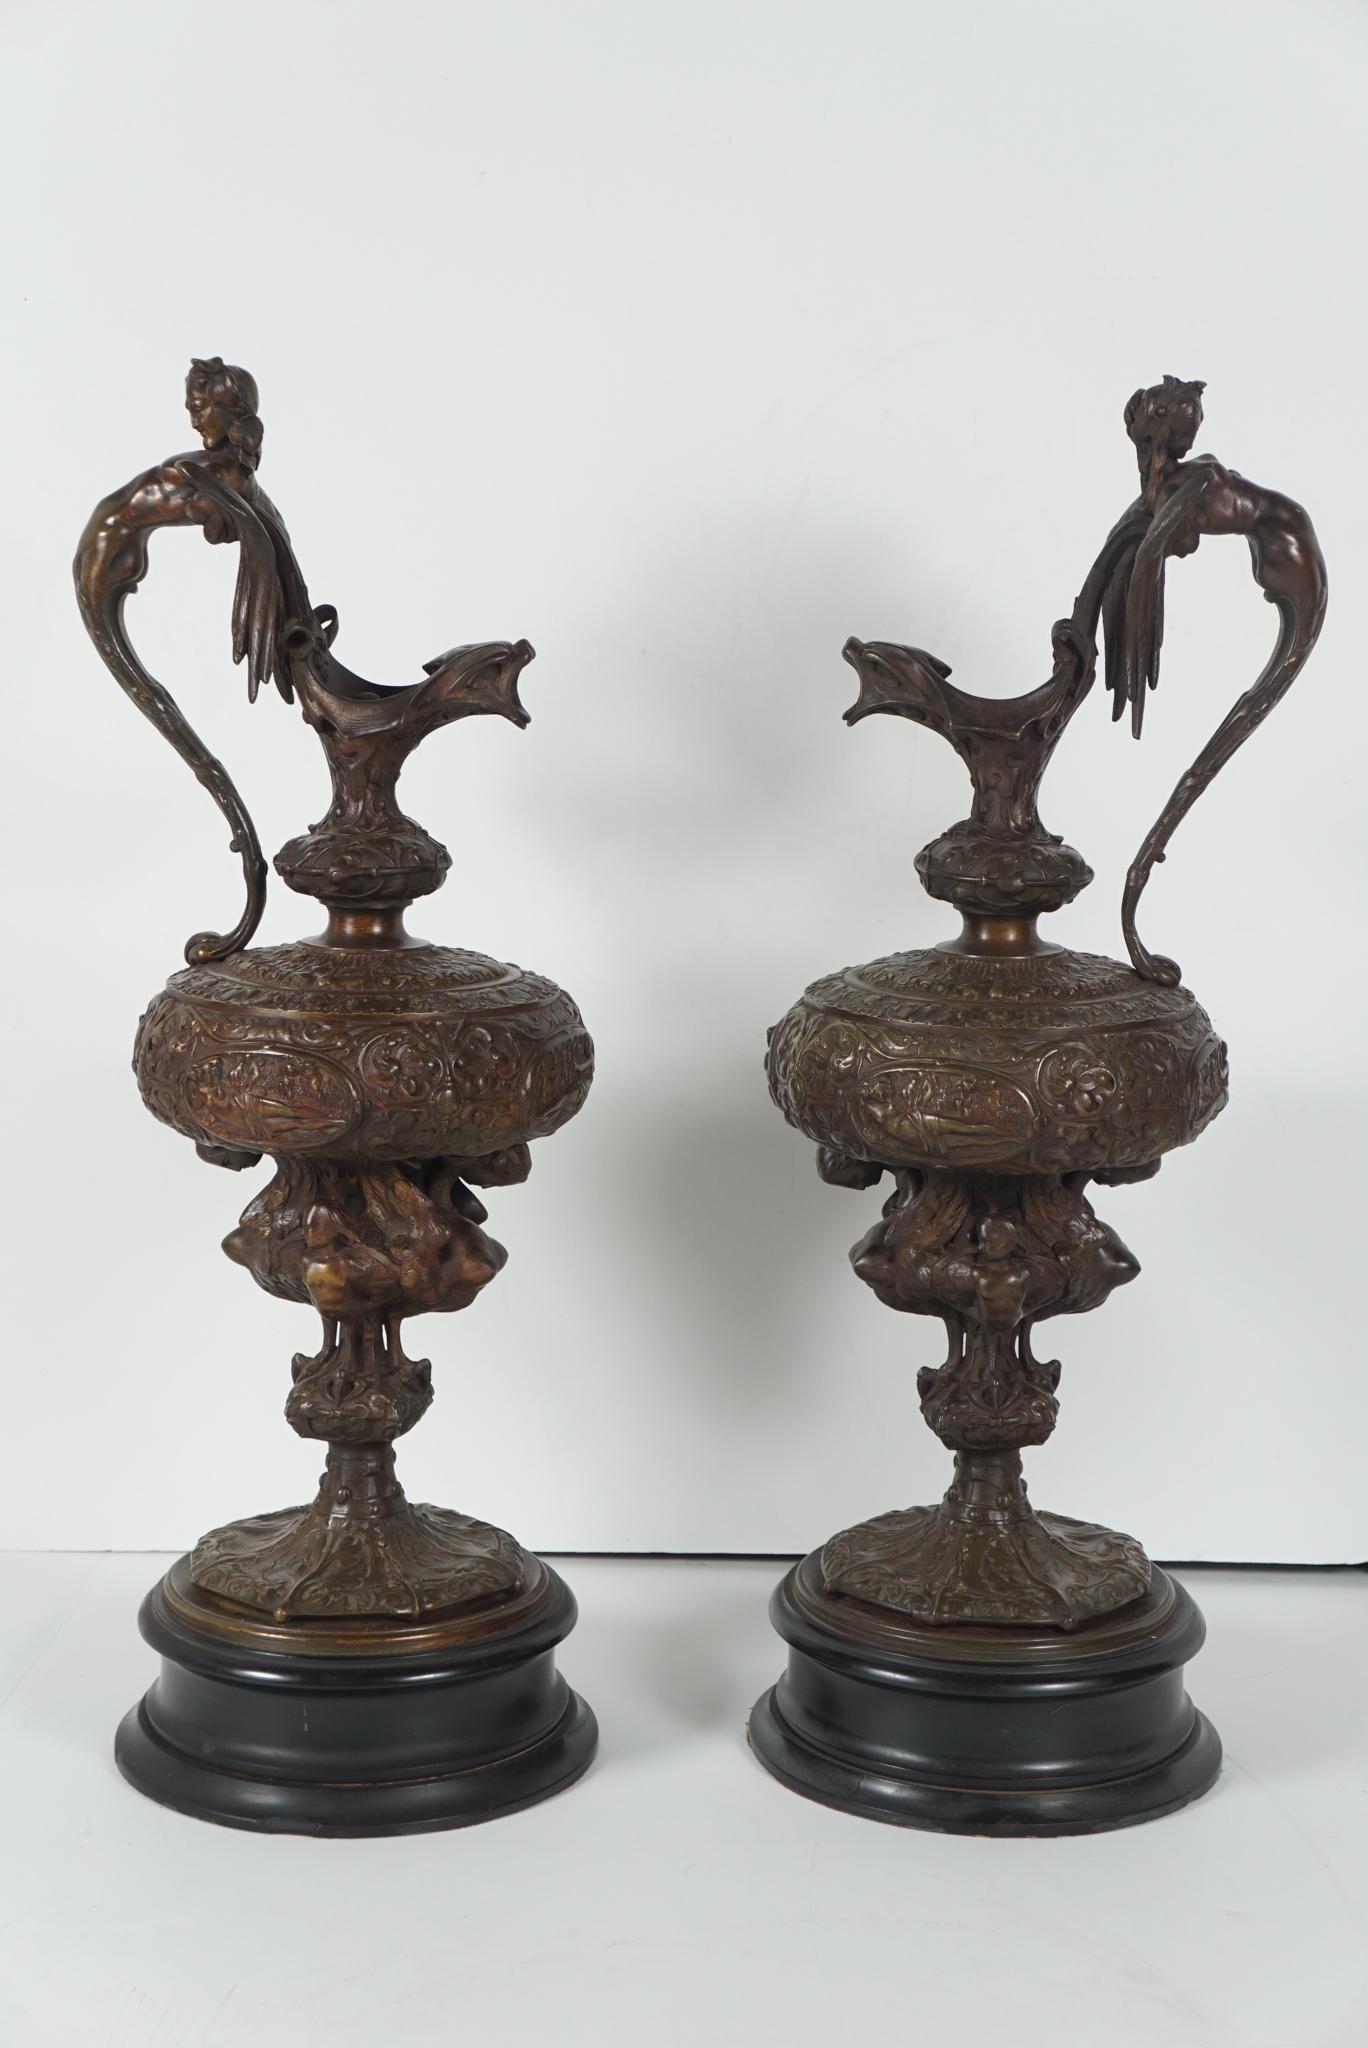 These large and very detailed Renaissance Revival cast bronze decorative ewers come from England and were made circa 1870. The body of the vases are divided into oval plaques representing allegorical scenes from the past all surrounded by arabesques